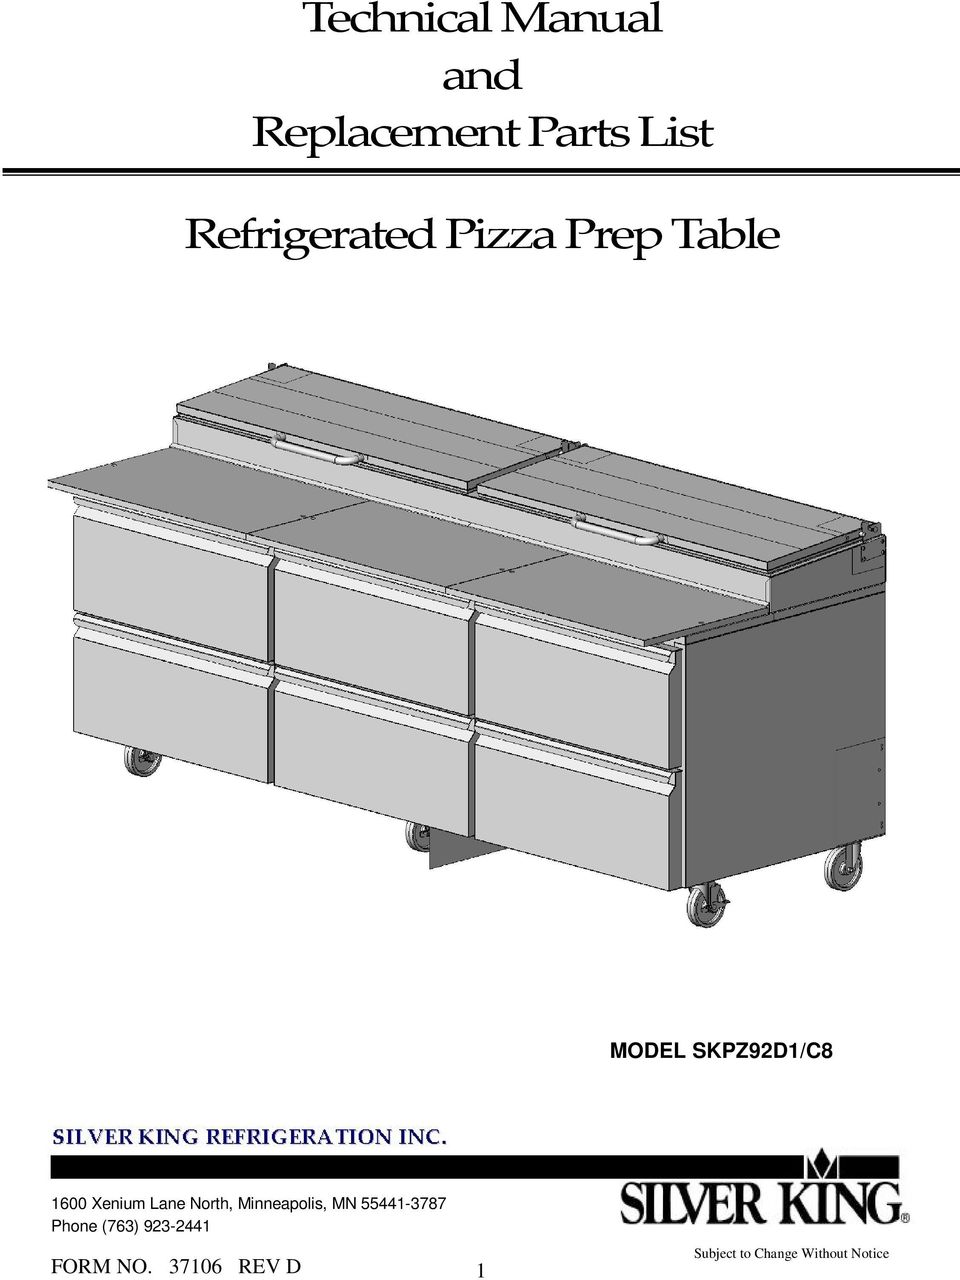 Technical Manual And Replacement Parts List Refrigerated Pizza